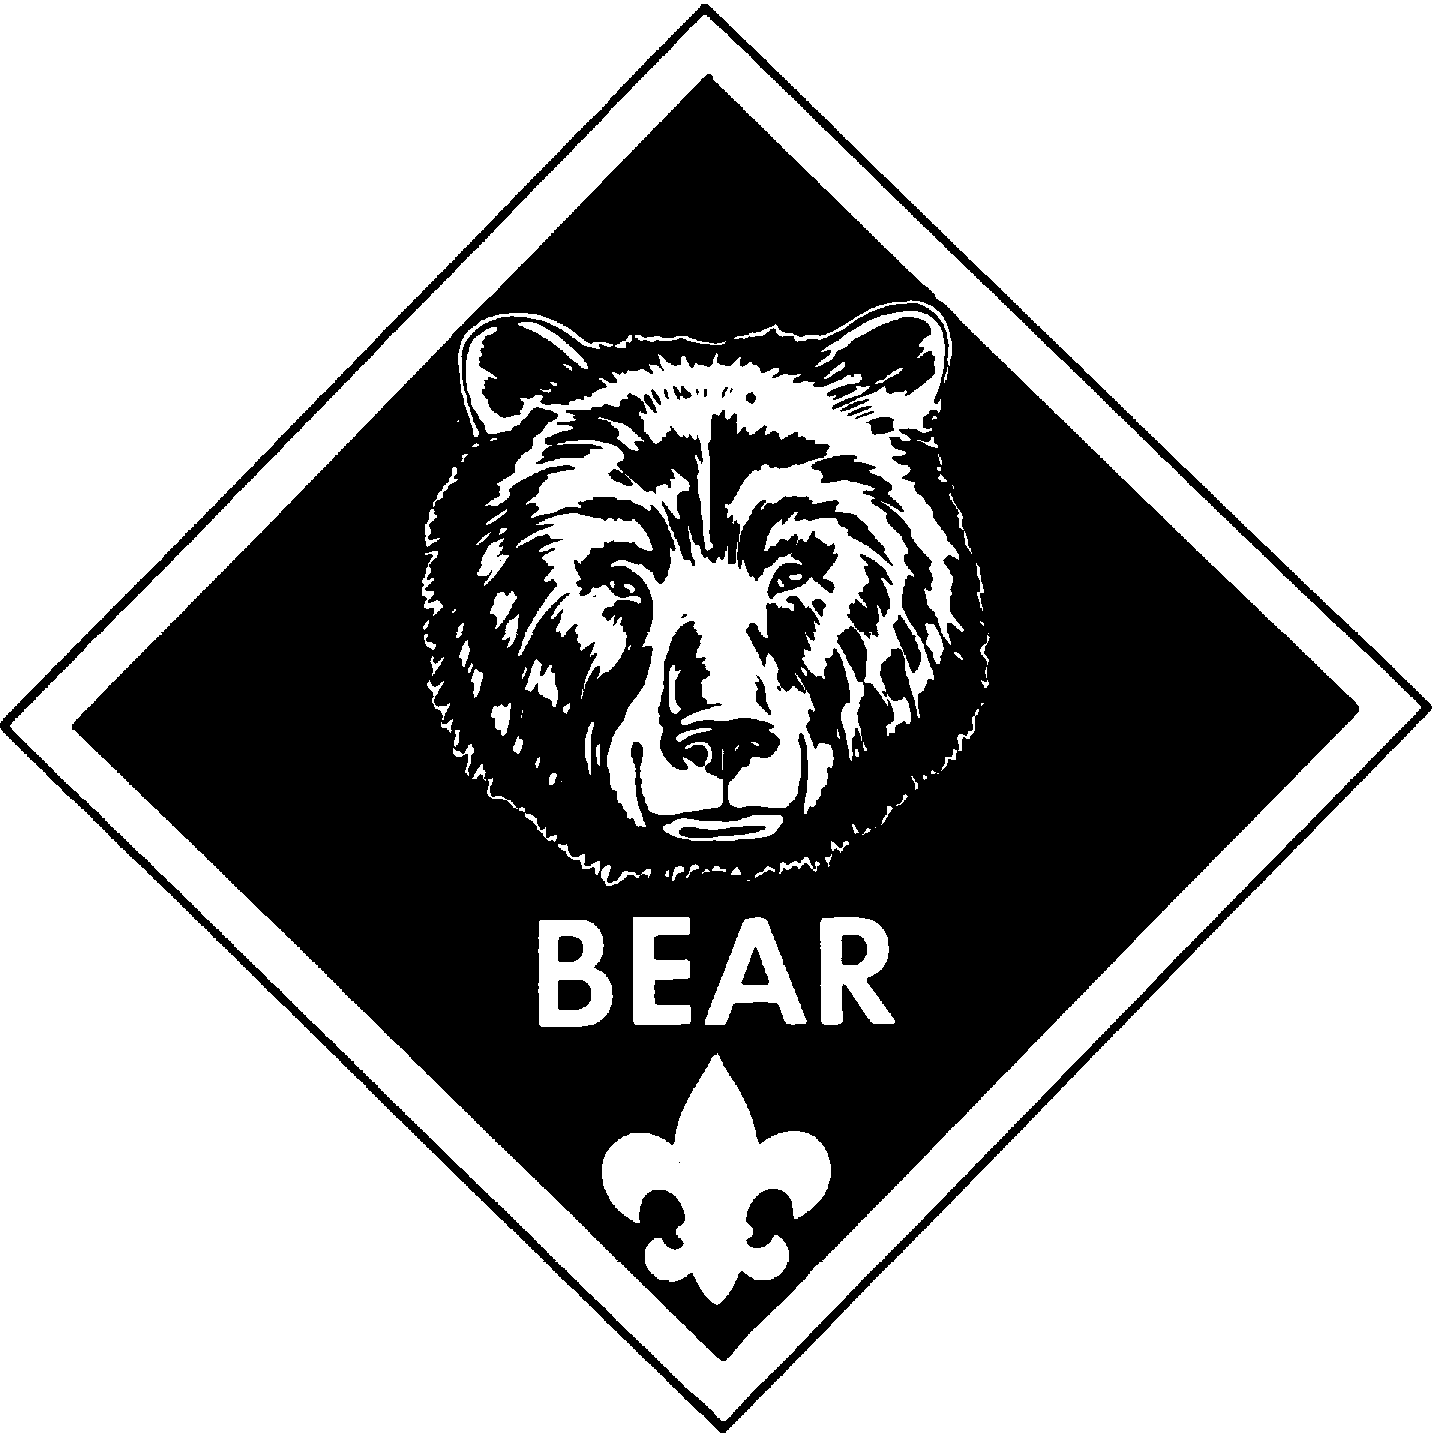 Images In The Bsa Cub Scouts Bear Insignia Directory